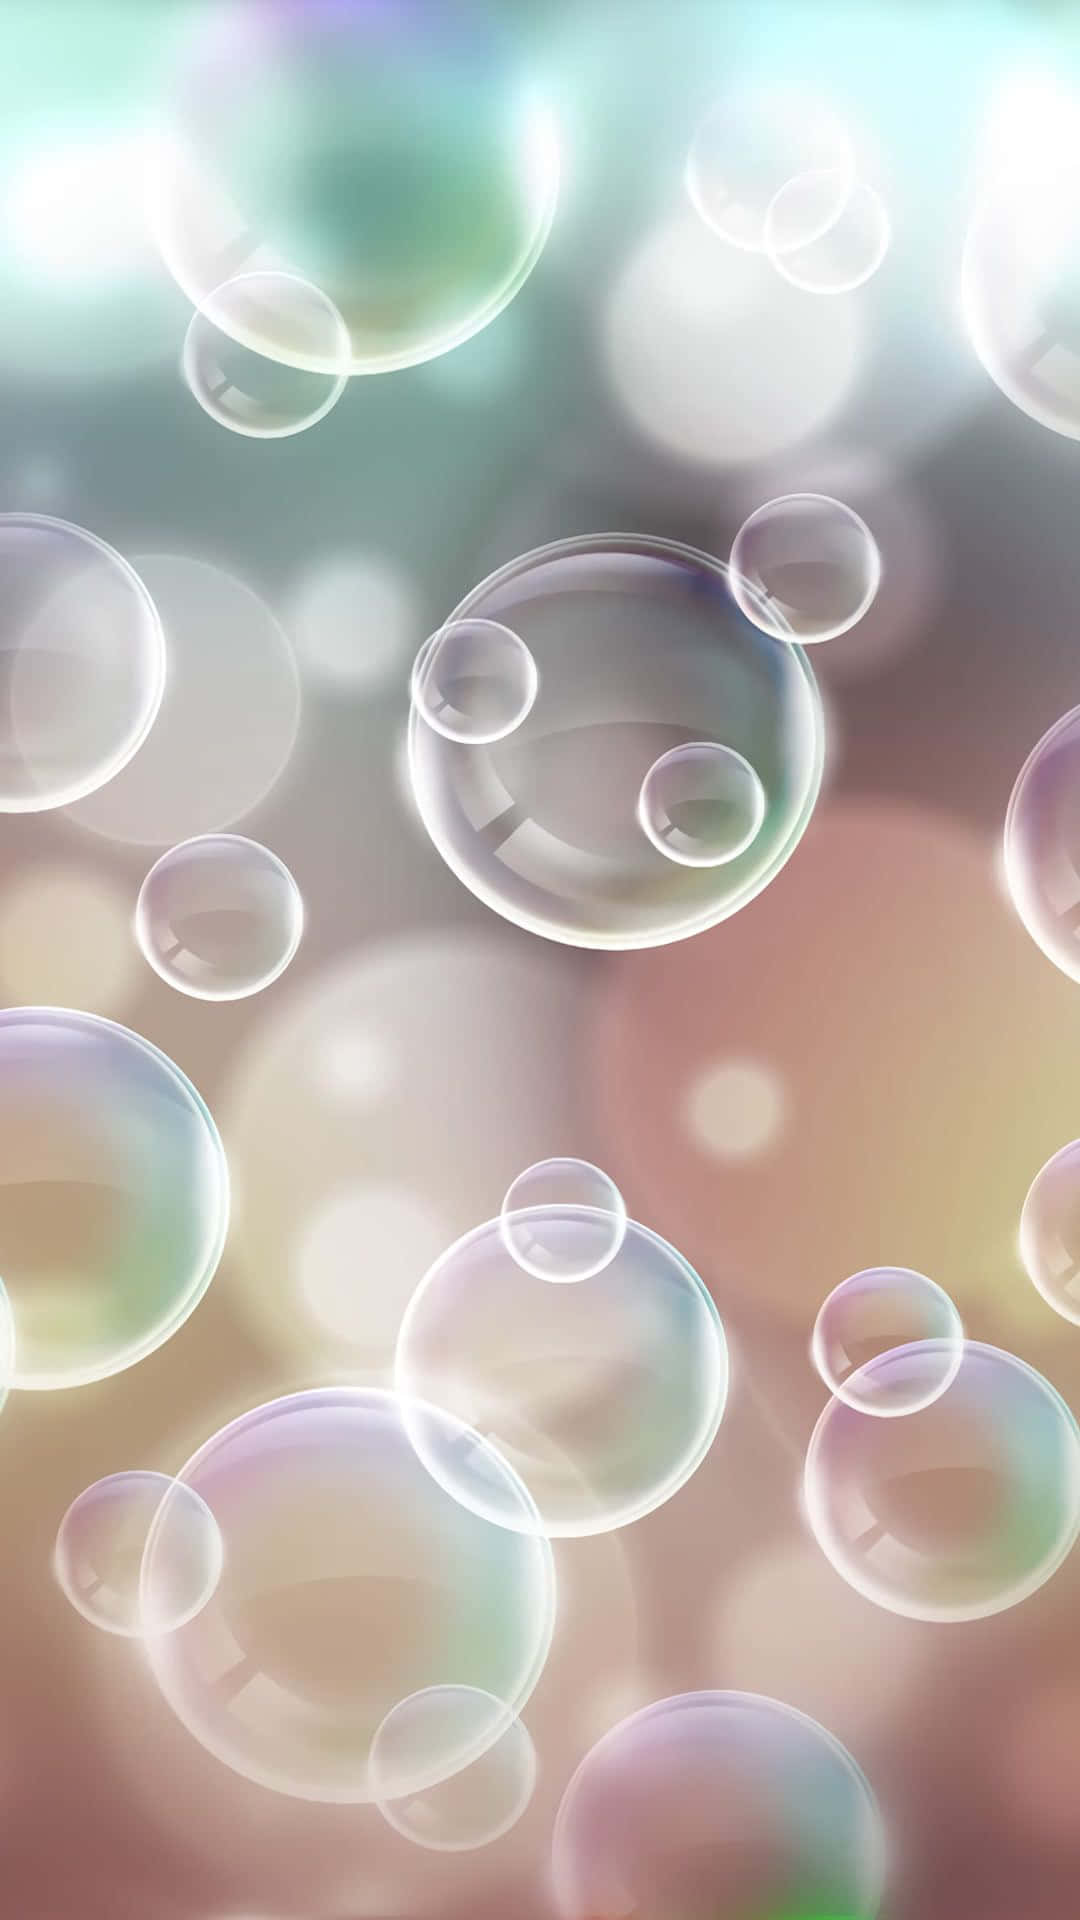 Soap Bubbles On A Background Wallpaper